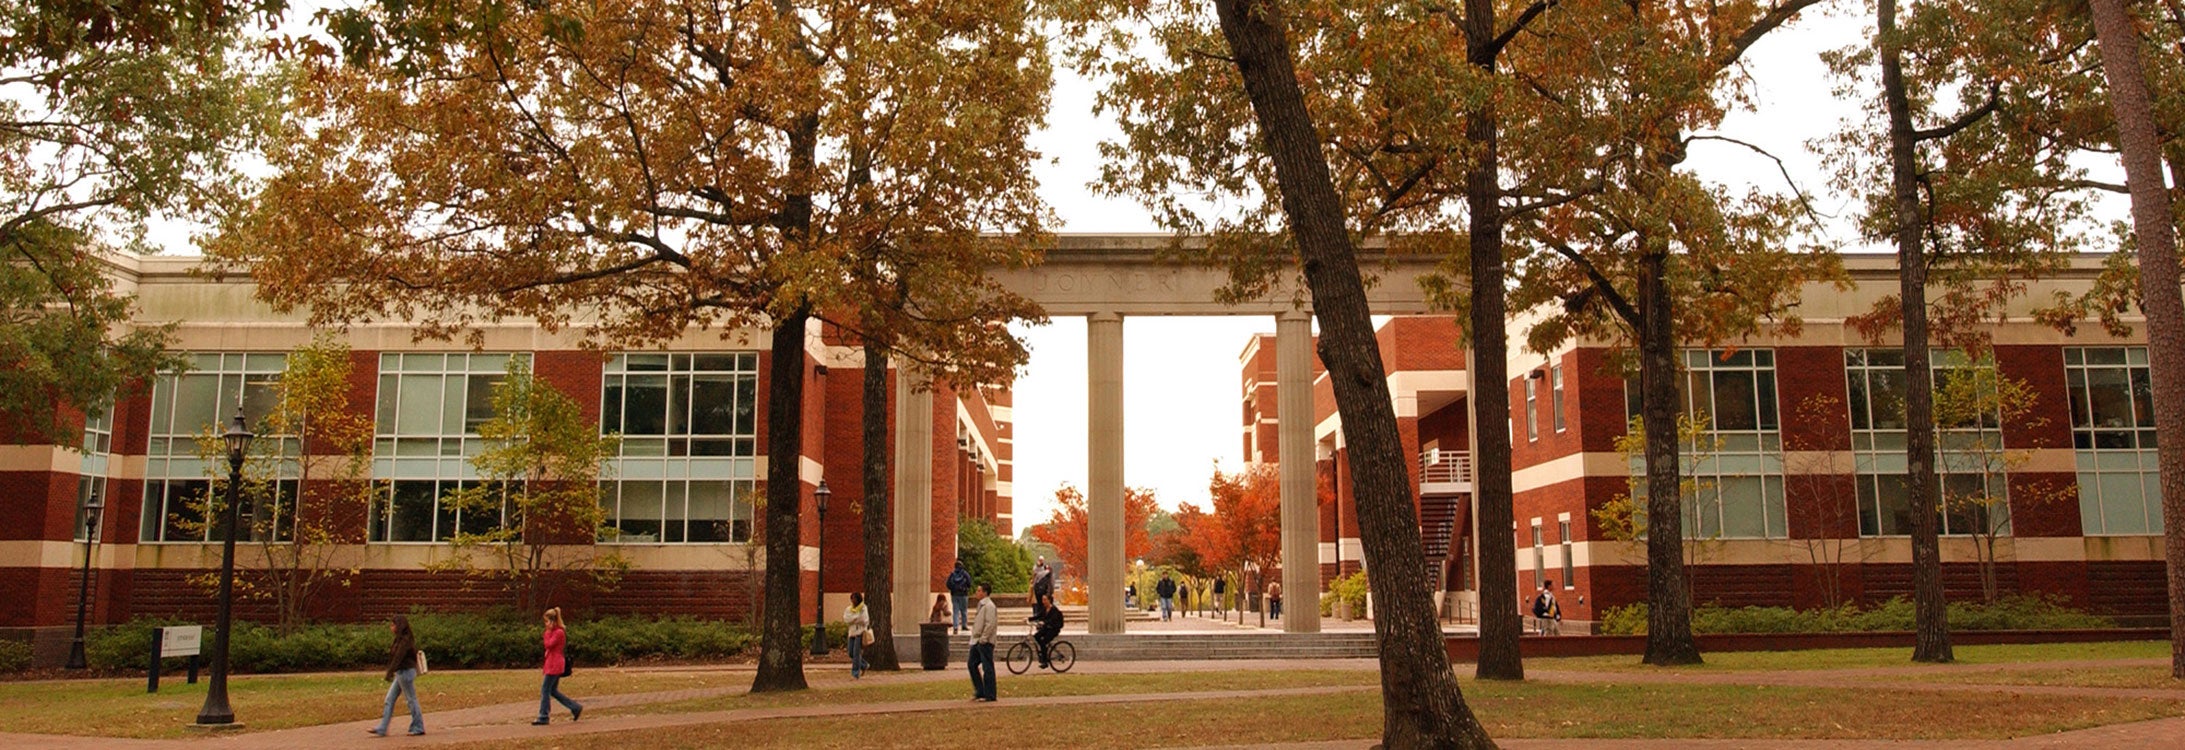 Students walking around campus and through the musical columns of Joyner Library